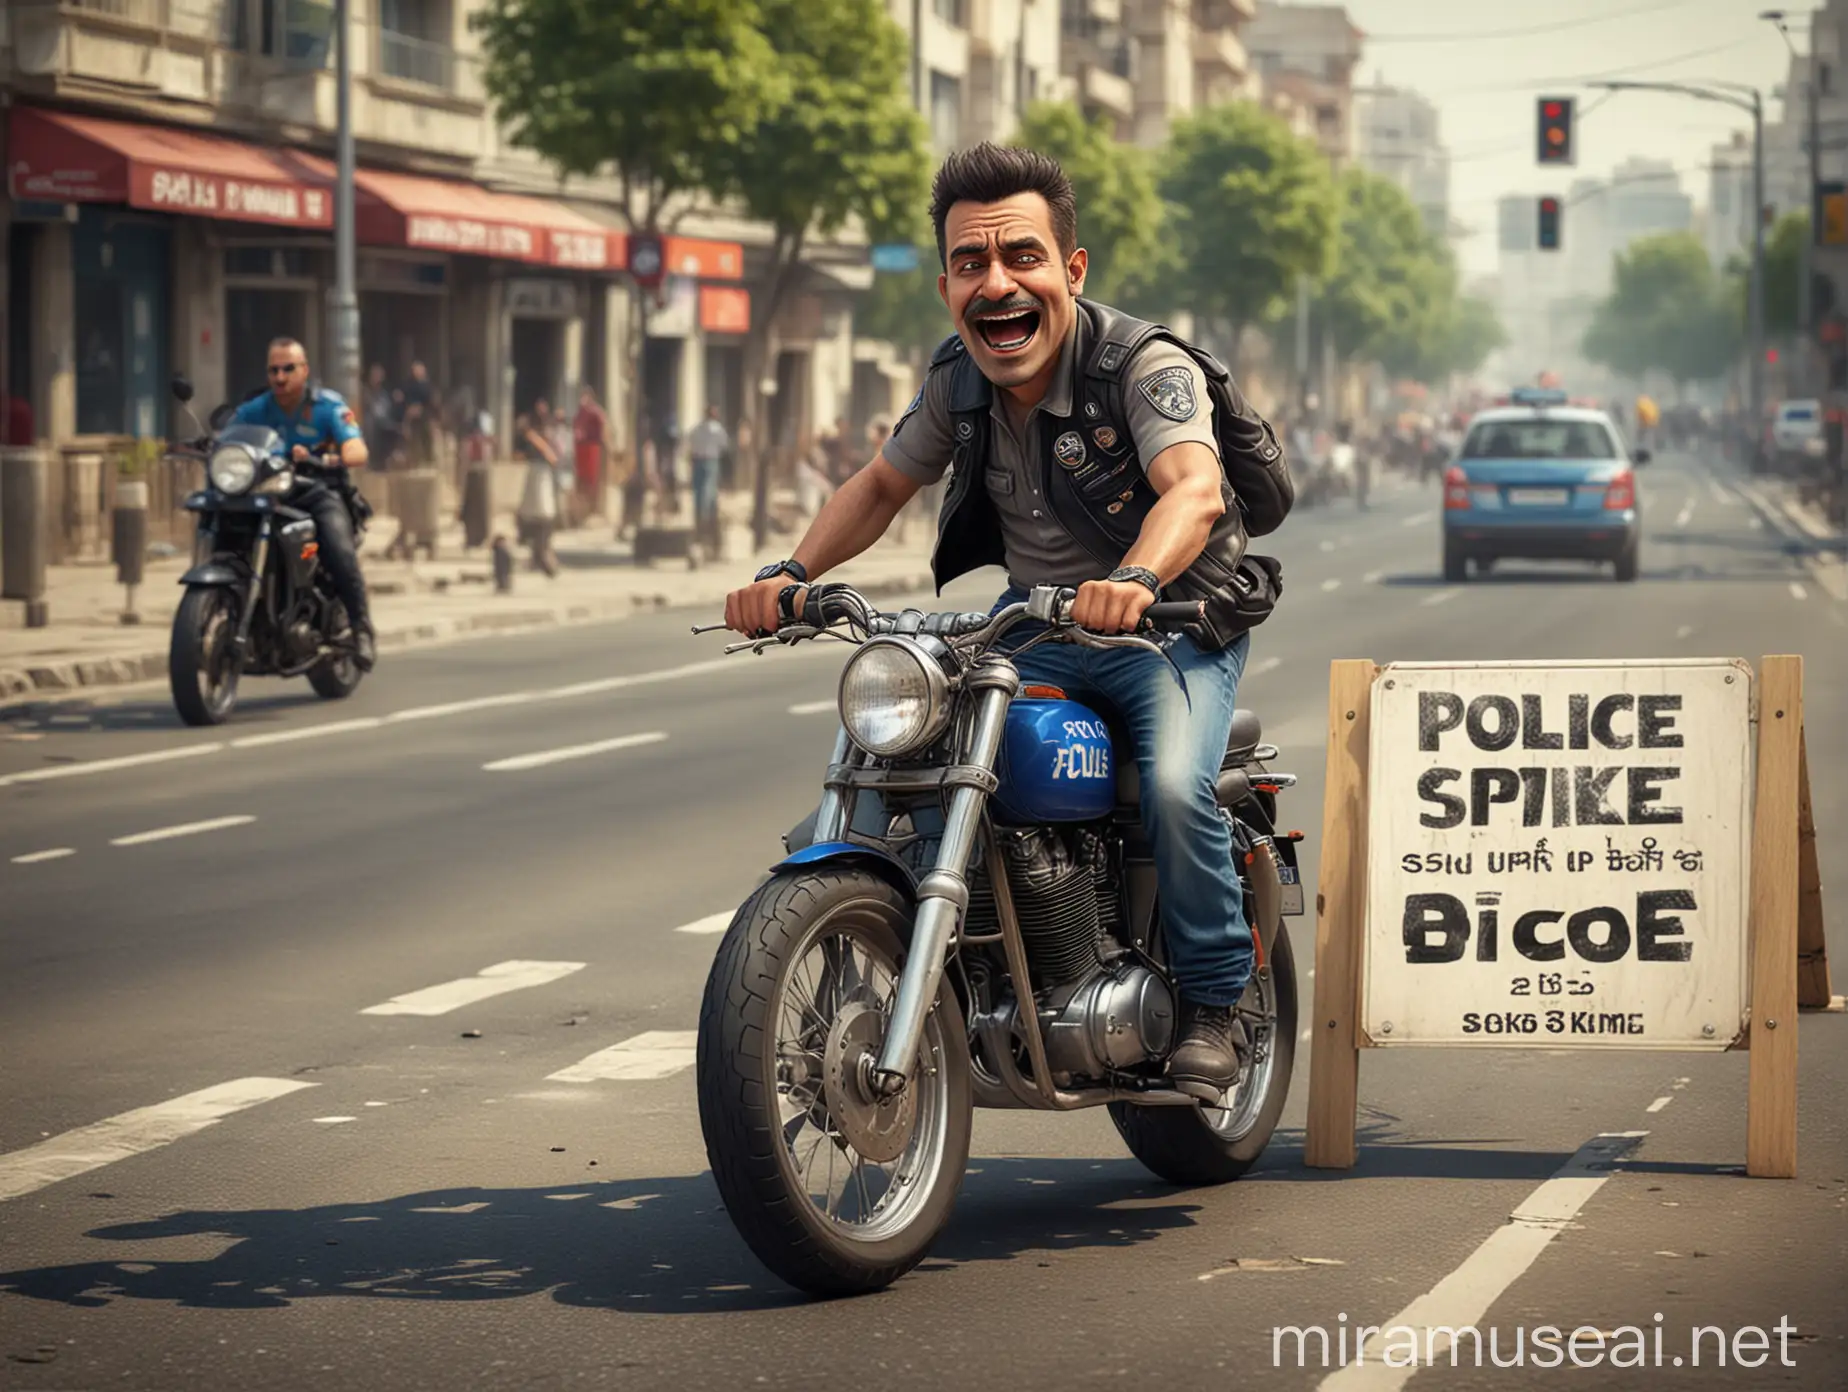 Funny biker trying to speed up his bike but he can't speed up with his bike. for trafic rules.. a police is sranding besides the road. The biker is very angy.. and the police is smiling.. on the road speed limit is 30km written on the board.. city background side view ultra realistic real image